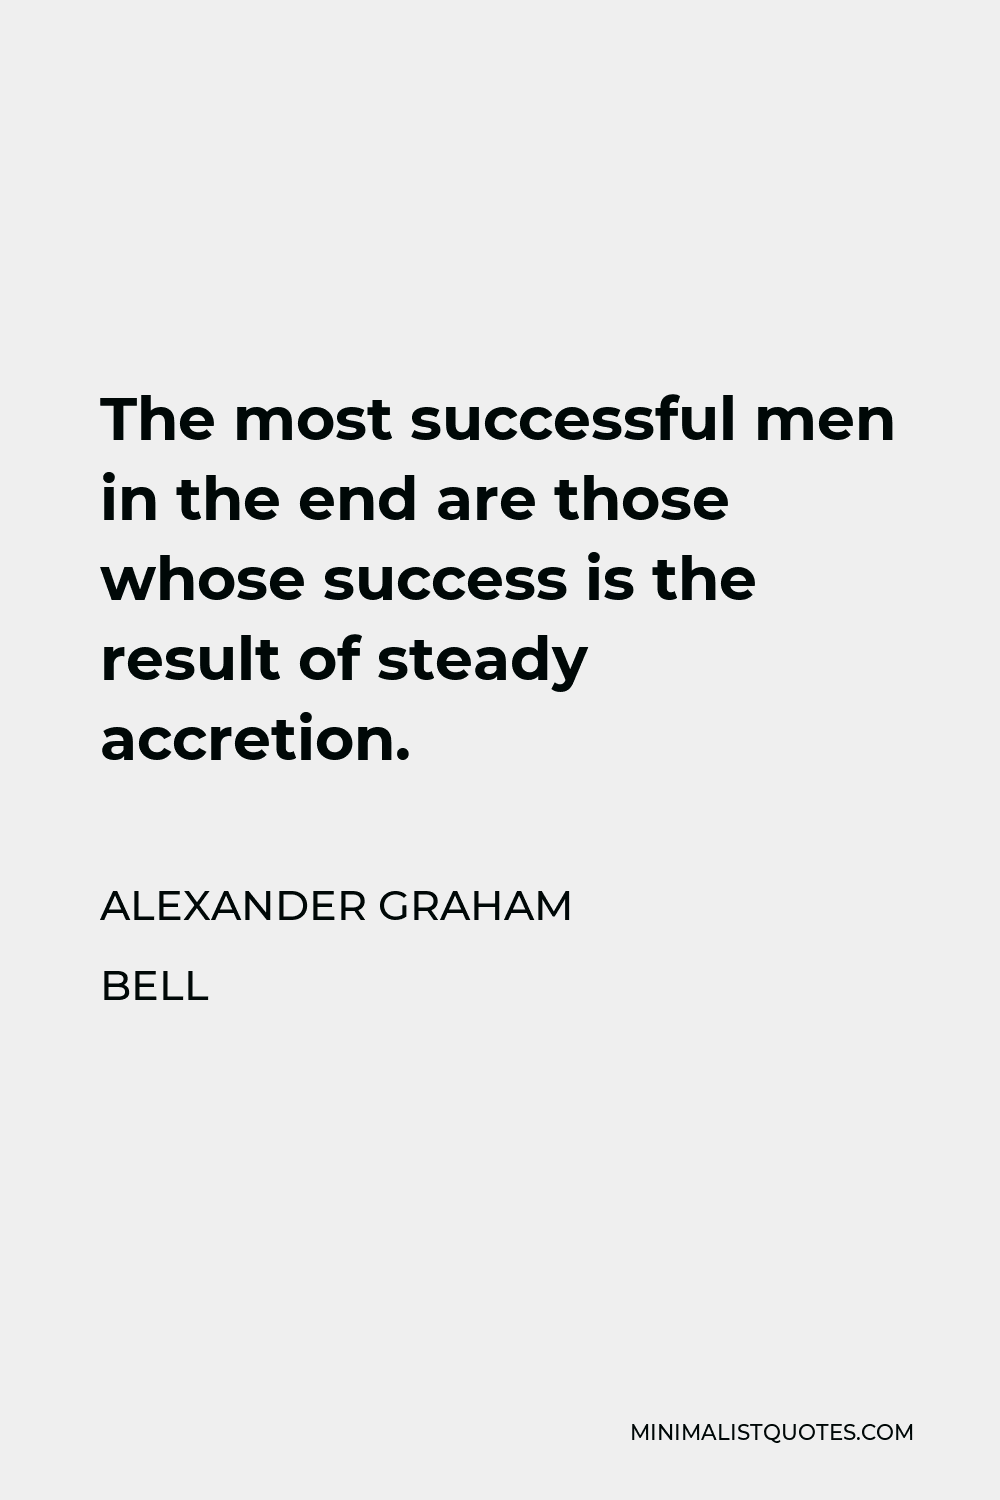 Alexander Graham Bell Quote - The most successful men in the end are those whose success is the result of steady accretion.